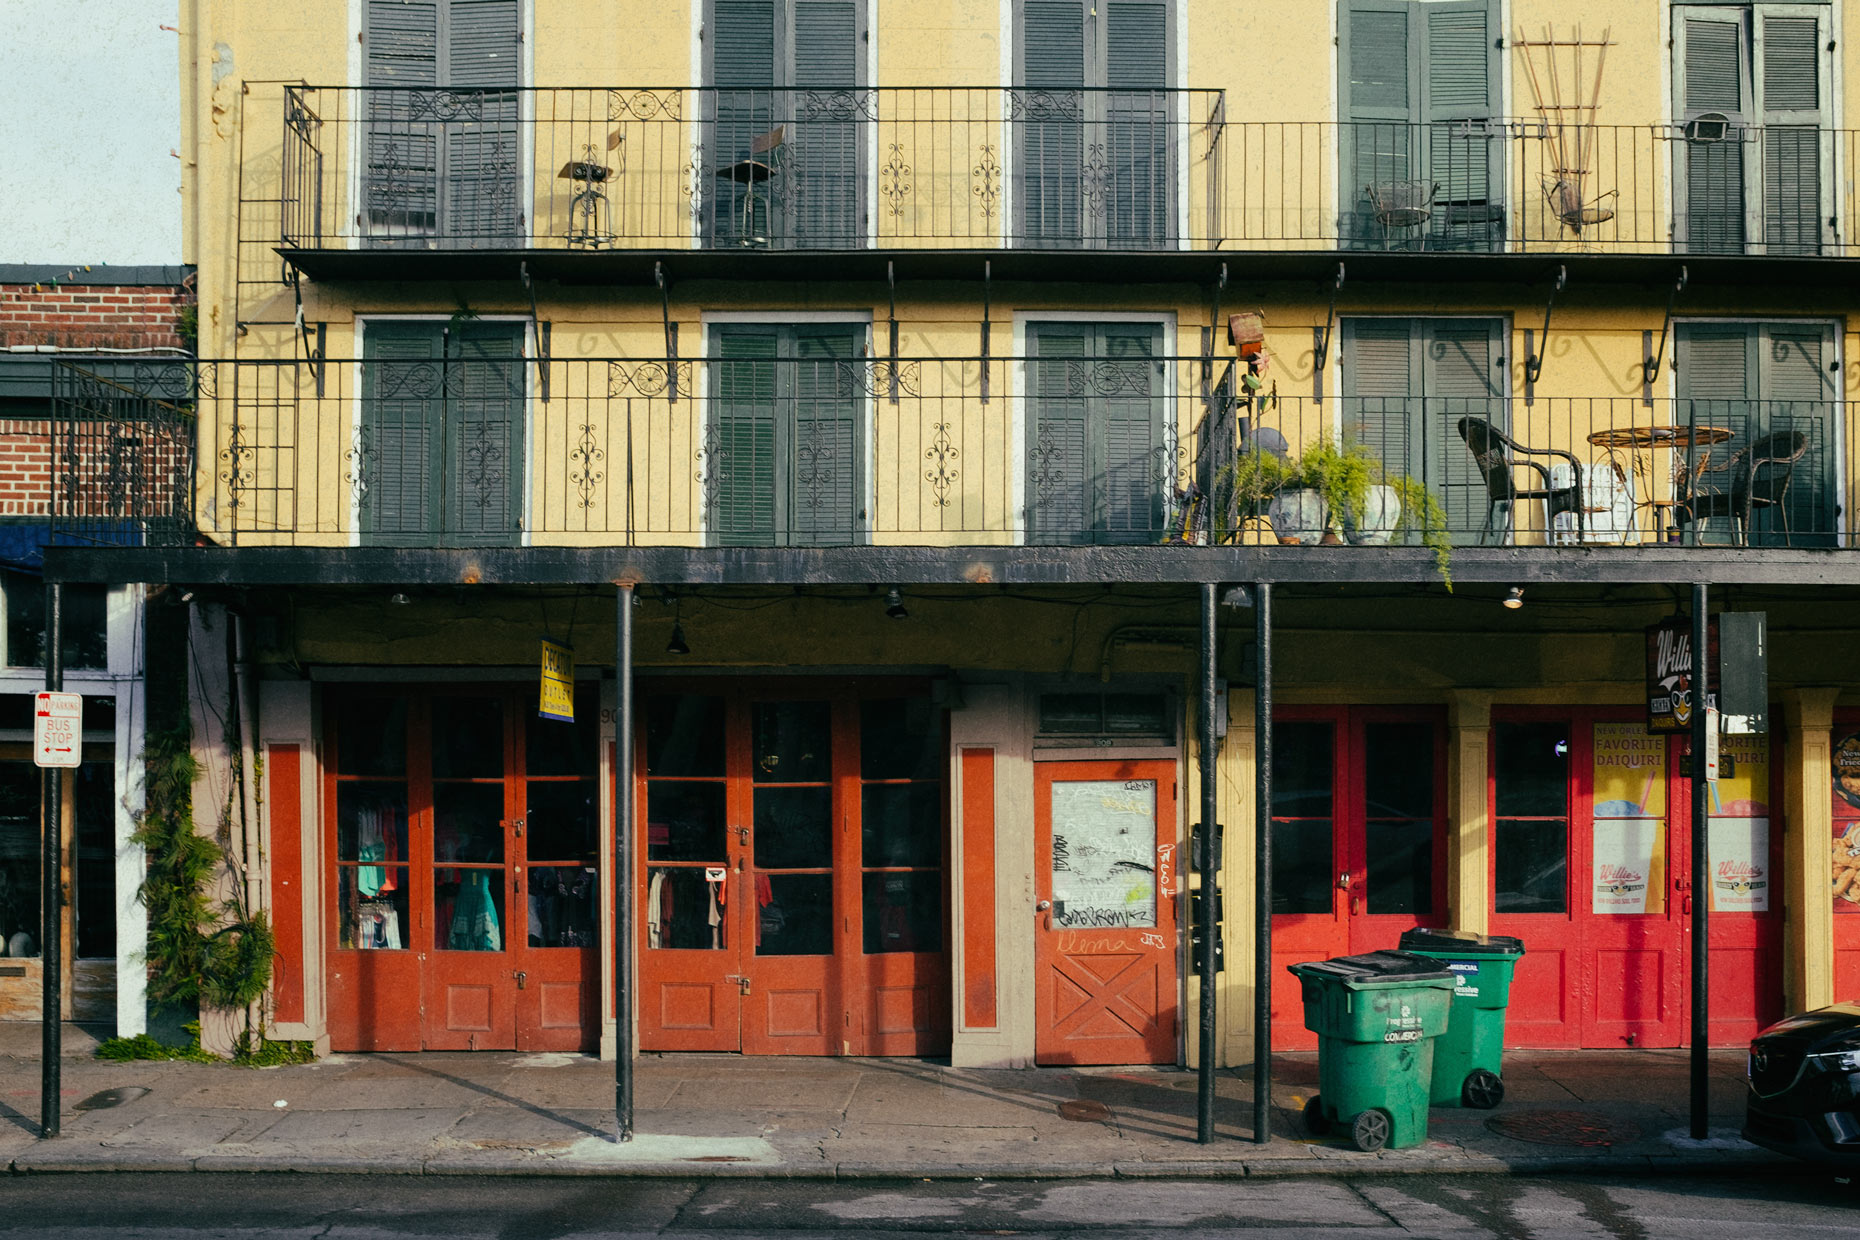 Street scene in New Orleans by photographer Kevin Brown